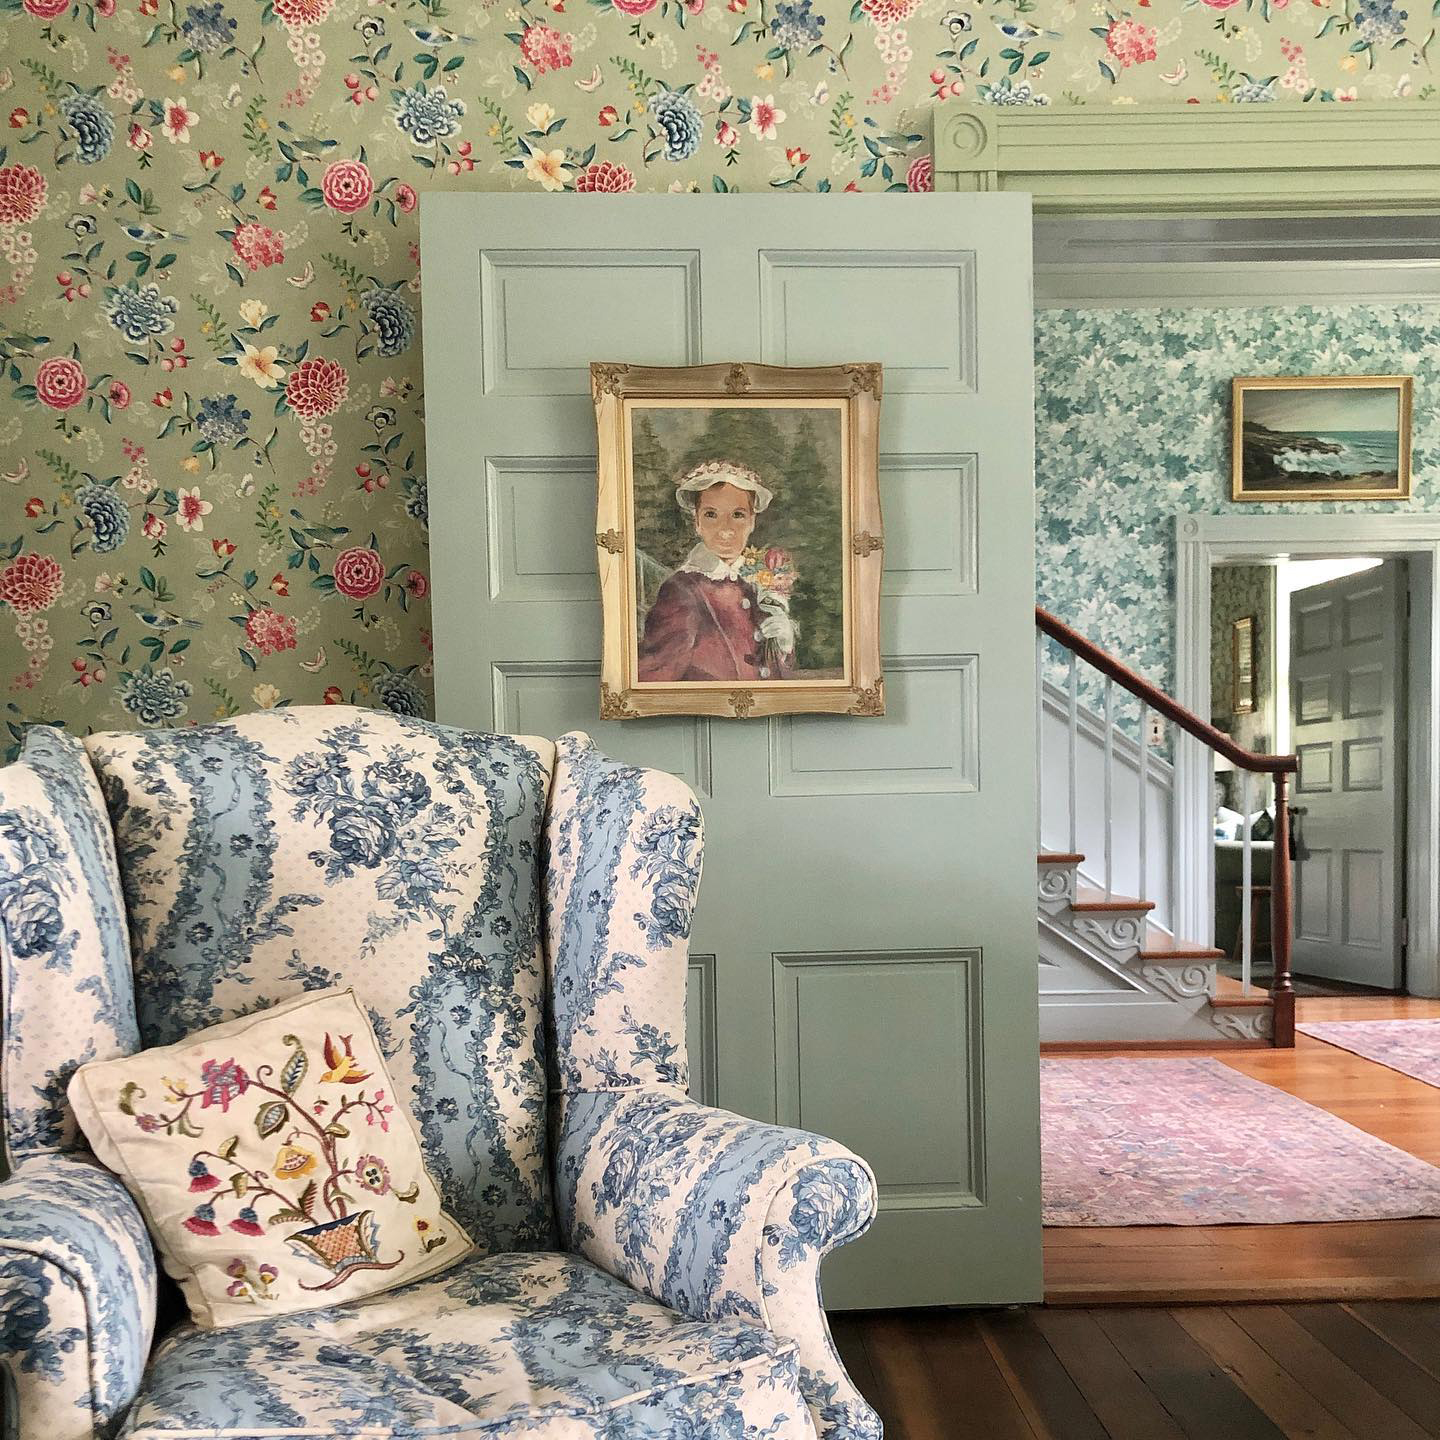 Charming English-inspired drawing room featuring floral wallpaper with a sage green backdrop and pink and blue flowers, a blue and cream floral wingback chair, and a portrait of a lady wearing a bonnet